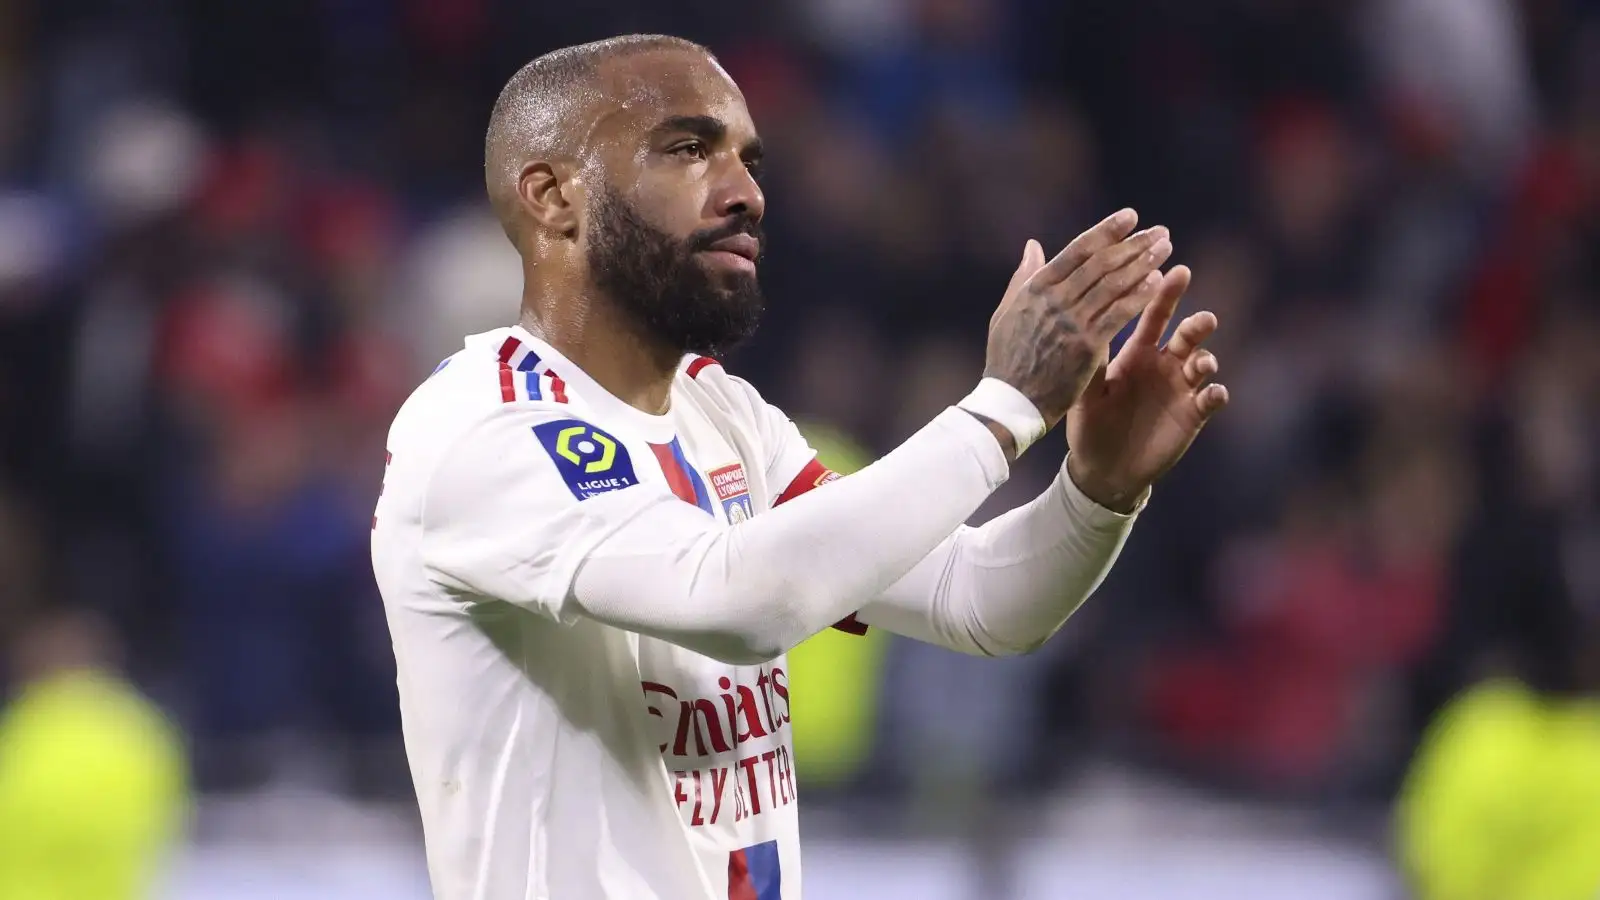 Look Arsenal fans; Lacazette is reborn among home comforts of Ligue 1